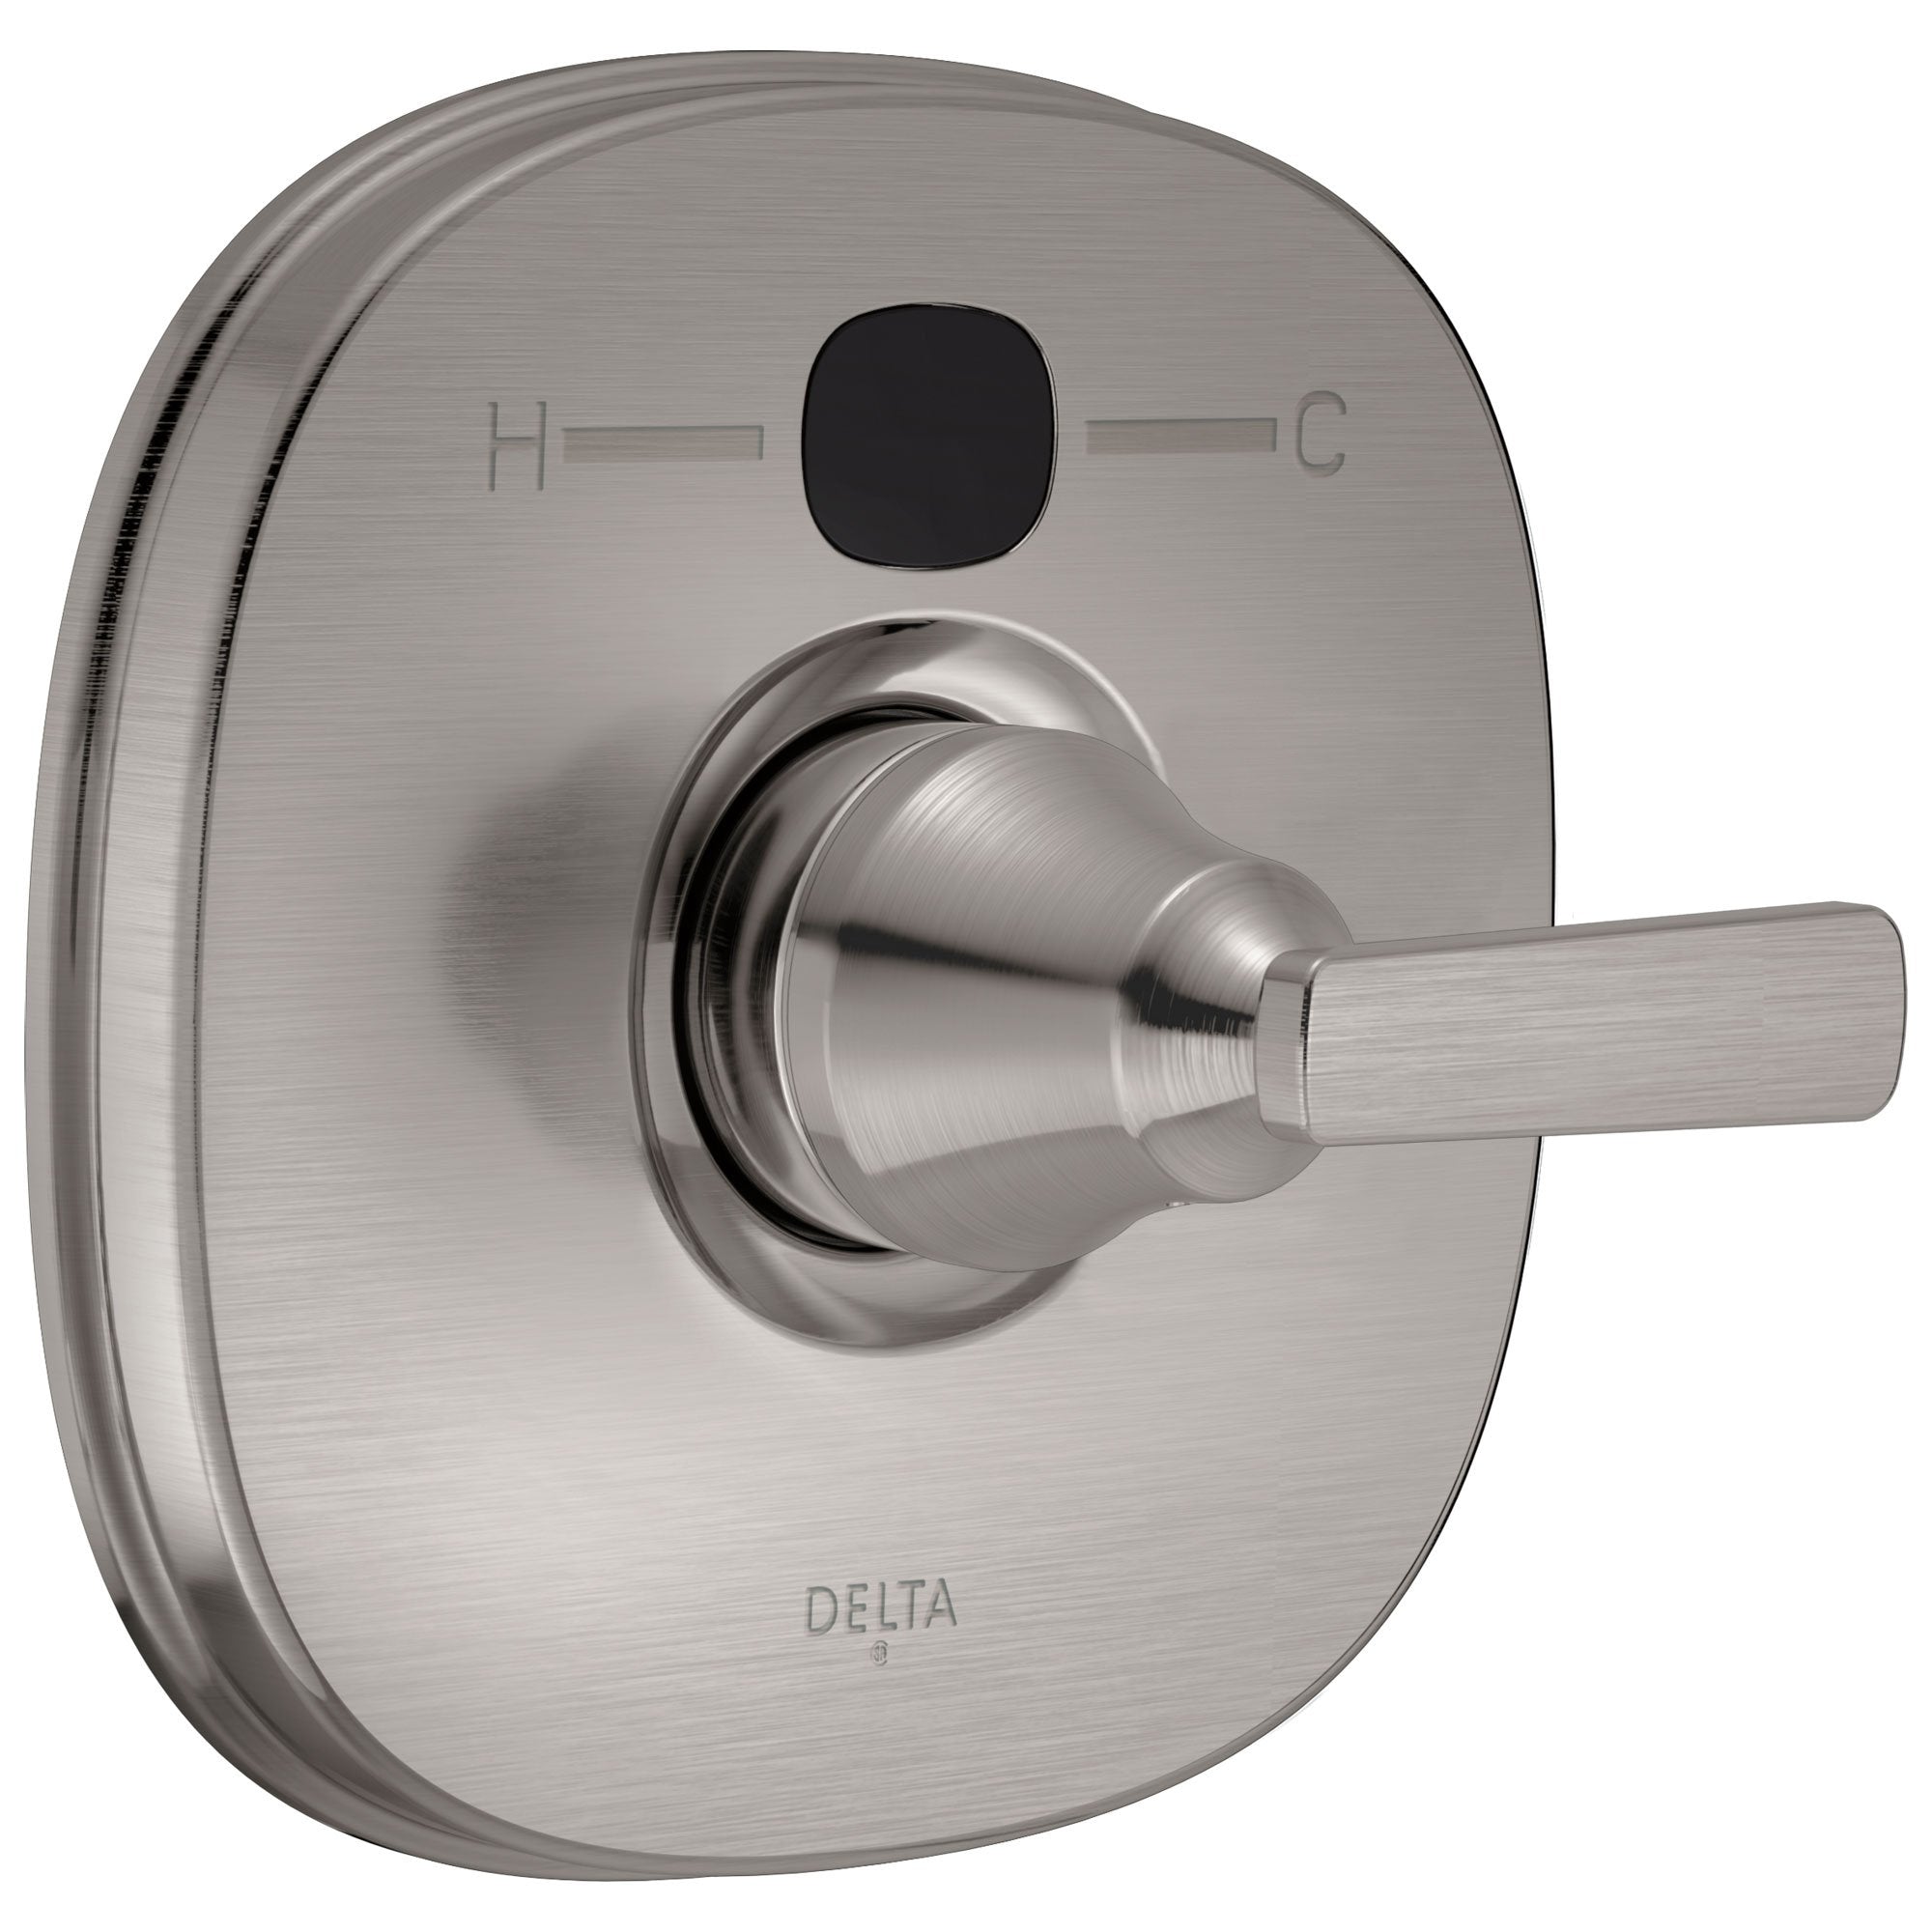 Delta Stainless Steel Finish Ashlyn Transitional 14 Series Digital Display Temp2O Shower Valve Control INCLUDES Single Handle and Valve without Stops D1616V